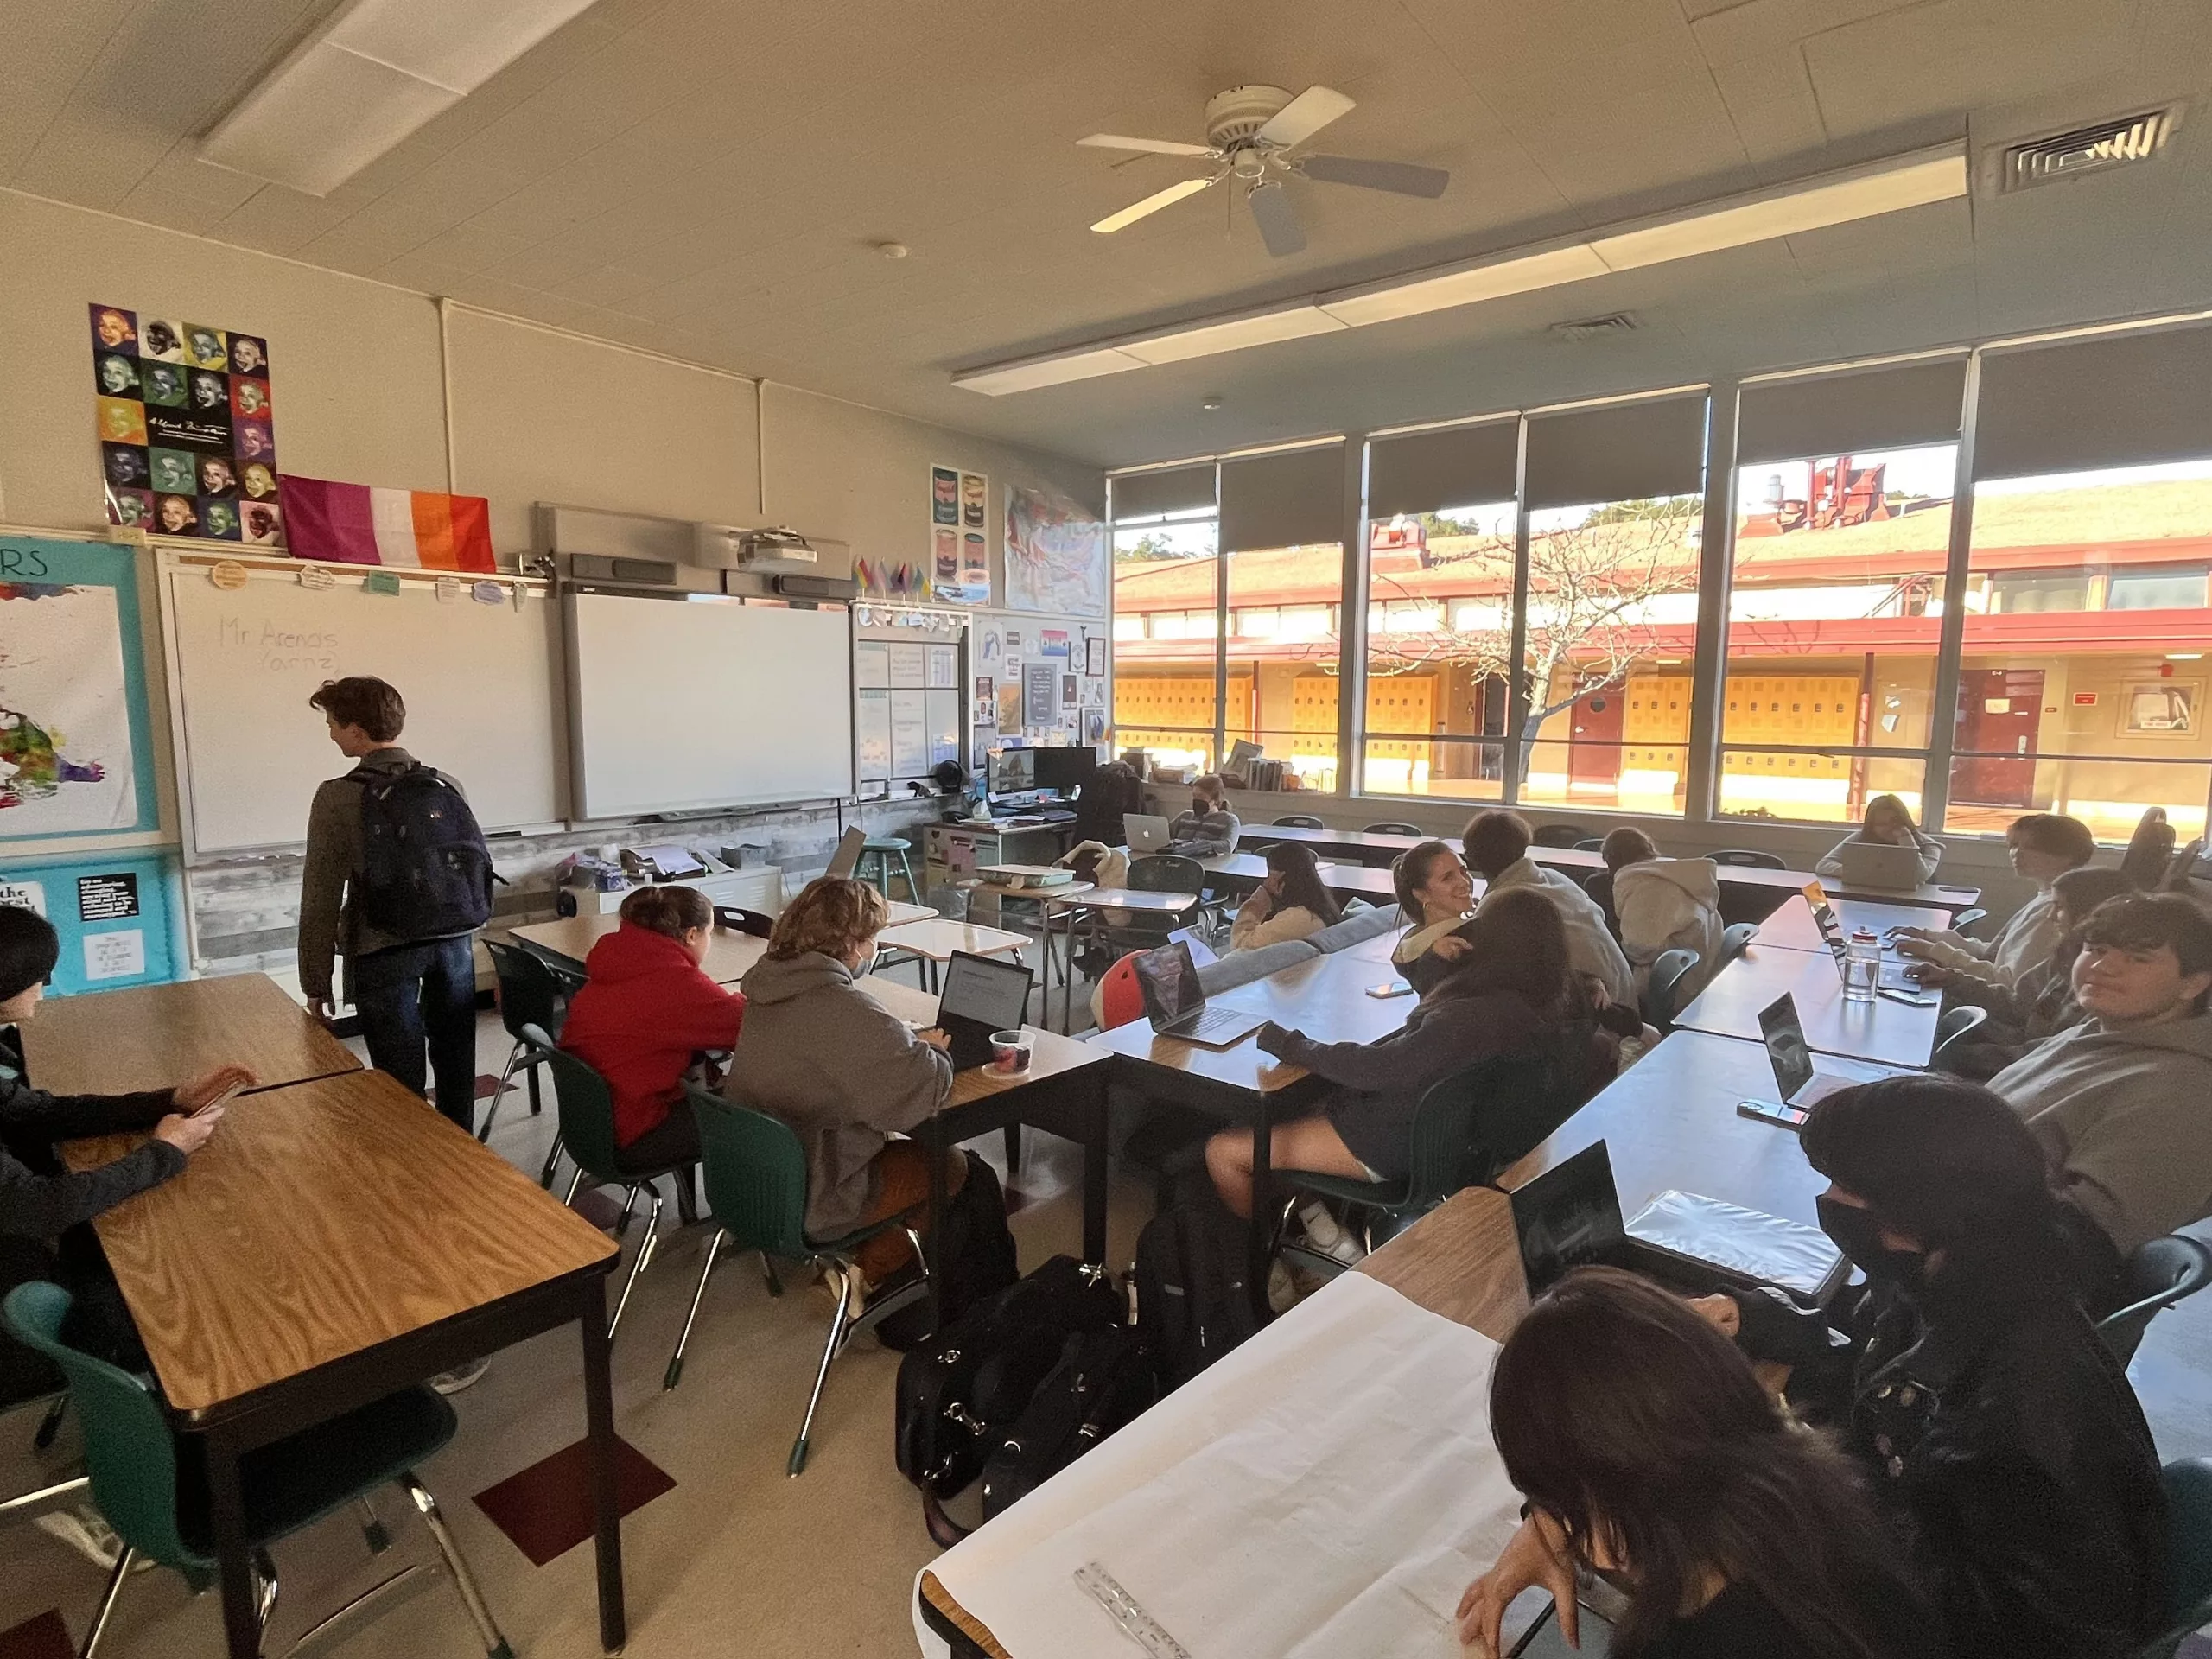 Students Consistently Absent to Seventh Period